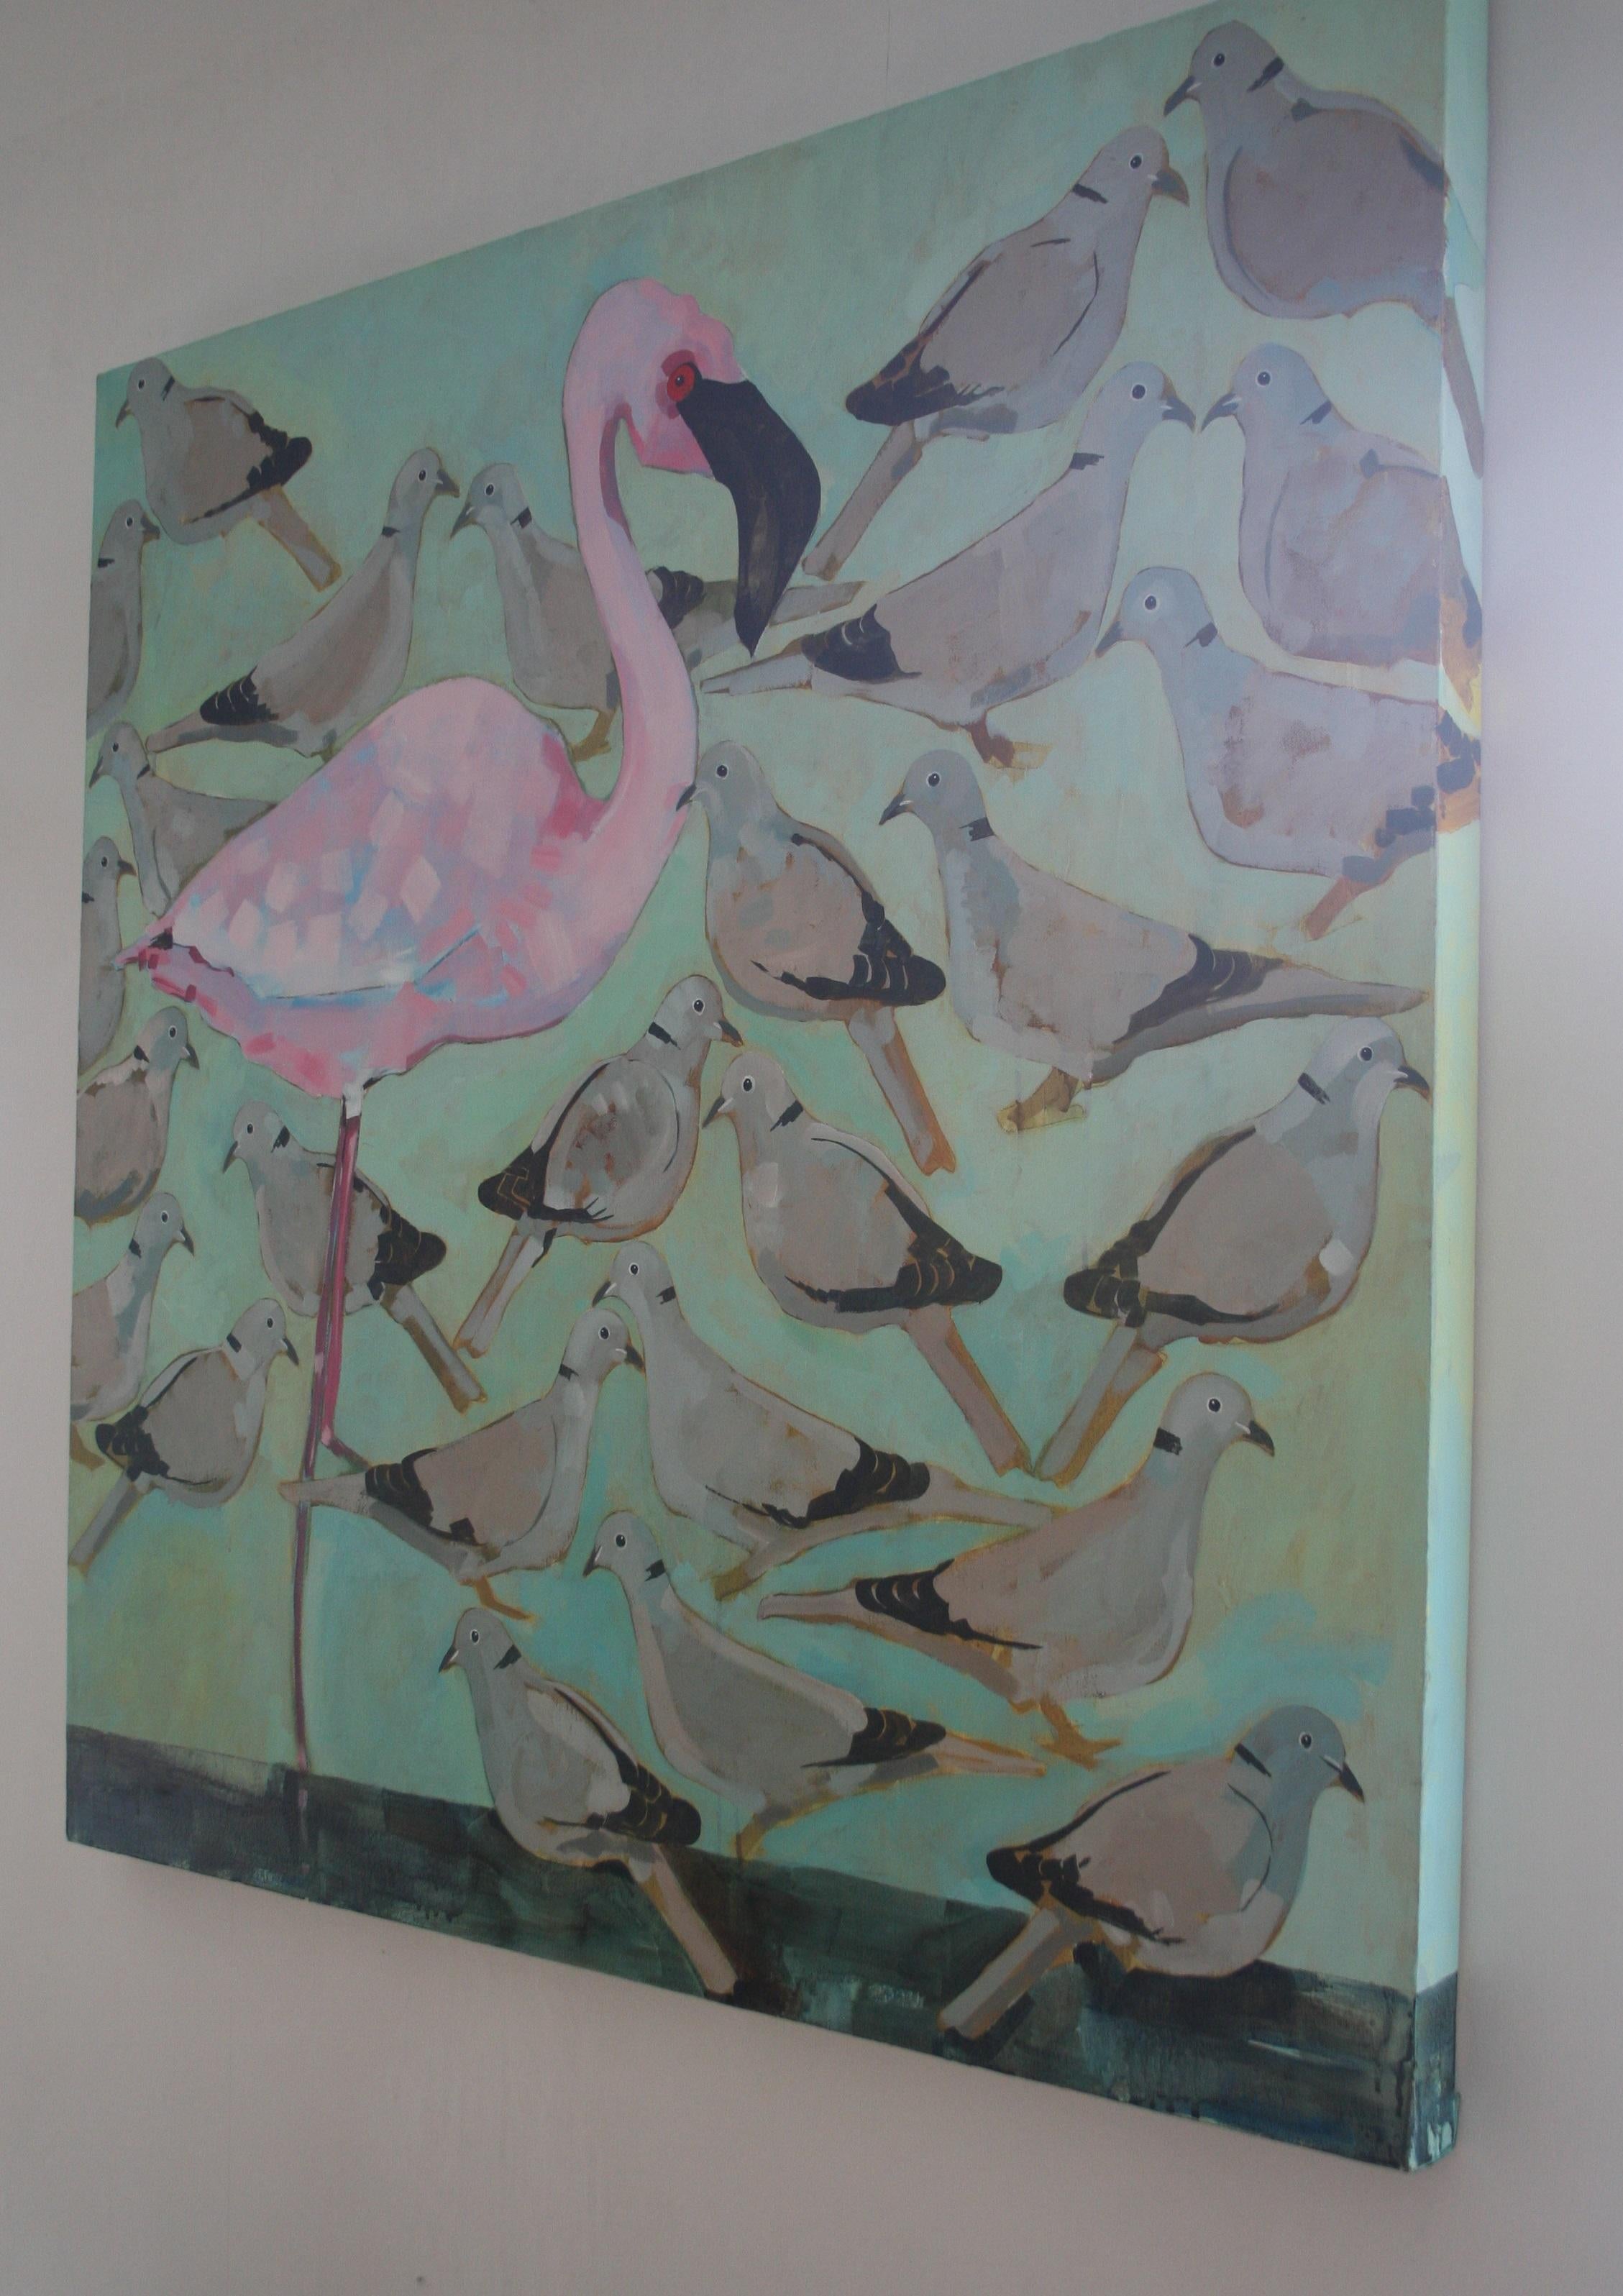 Study in Pink and Grey - contemporary Flamenco pigeons birds acrylic painting - Contemporary Painting by Christopher Rainham